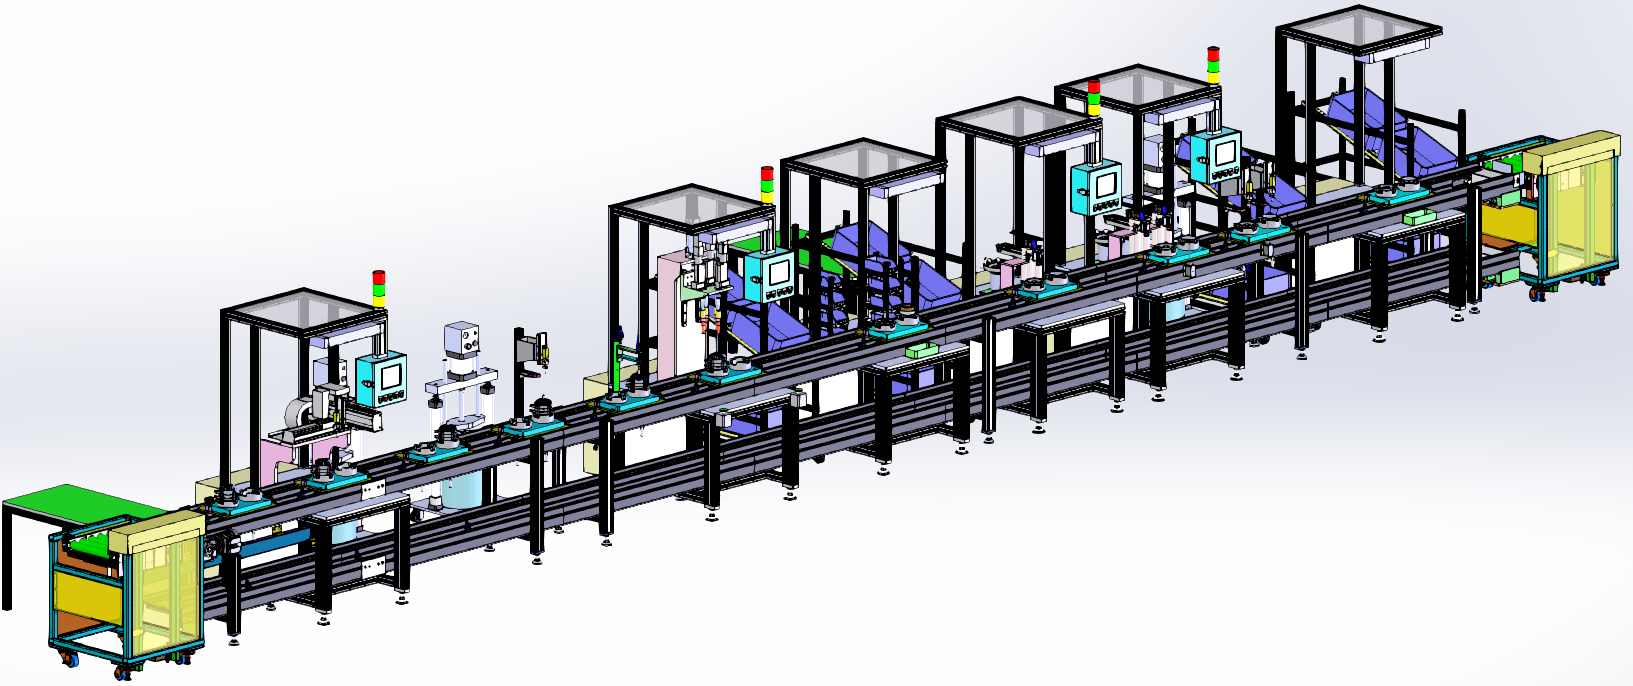 Generator semi-automatic production line designed by Solidworks